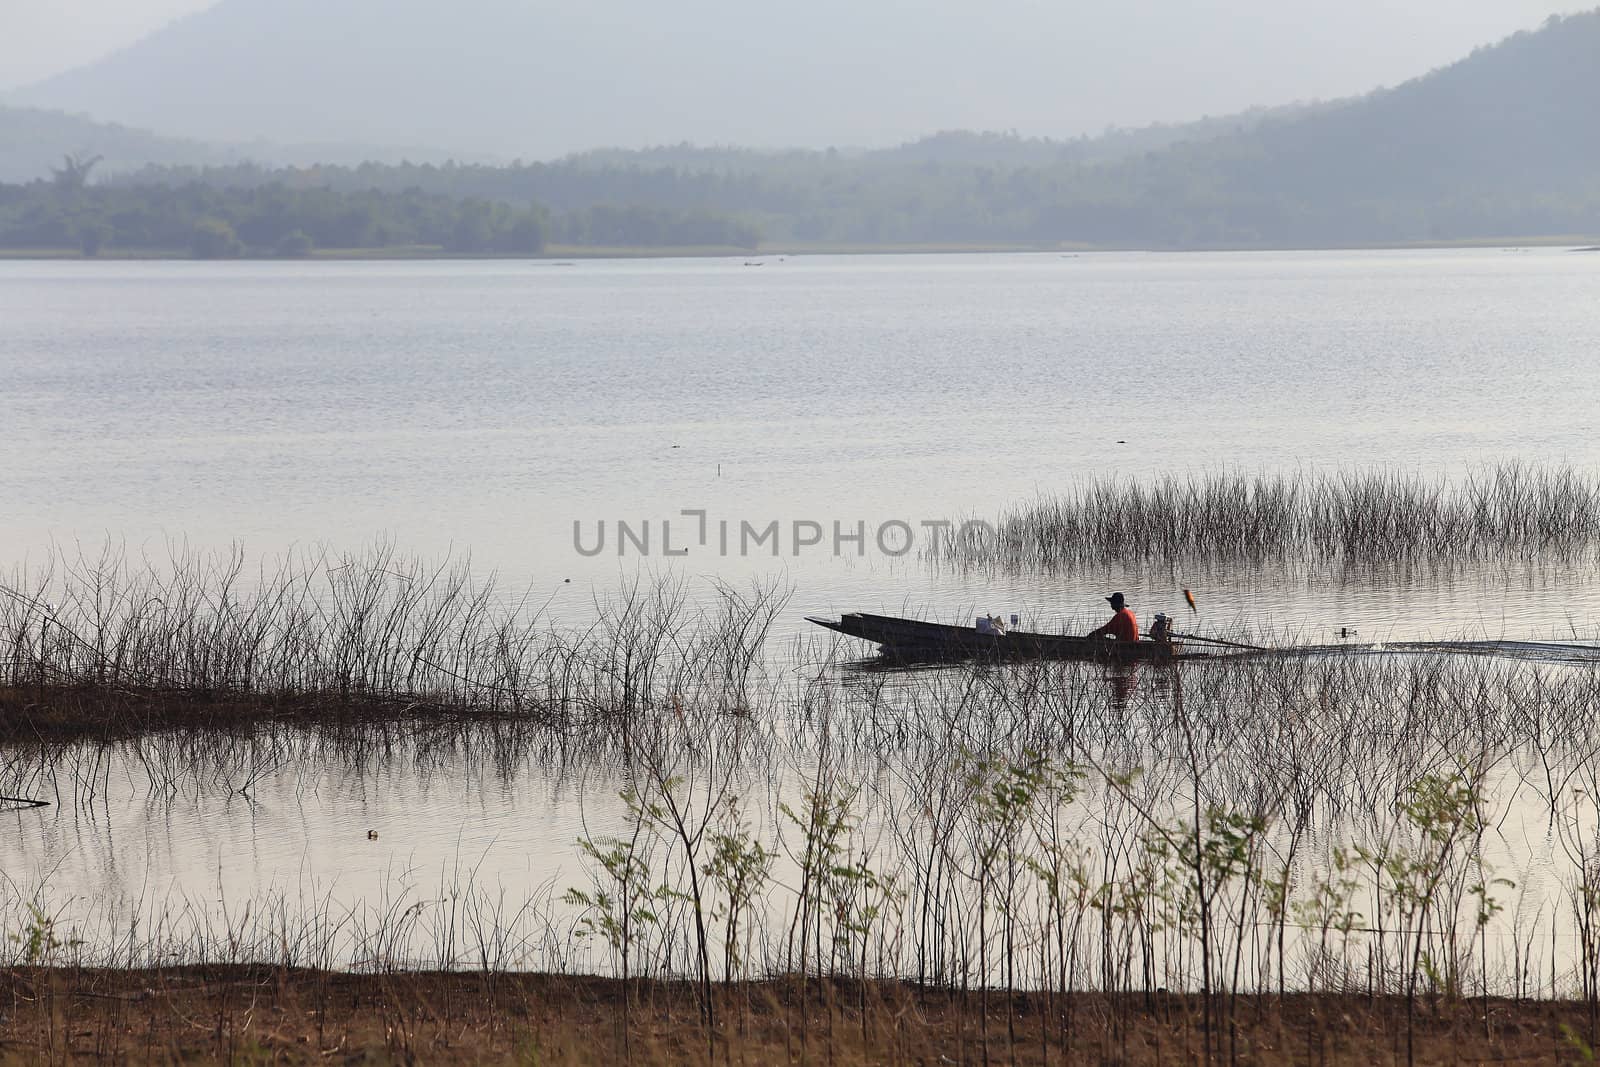 silhouette of fisherman on wood boat at lake. by rufous